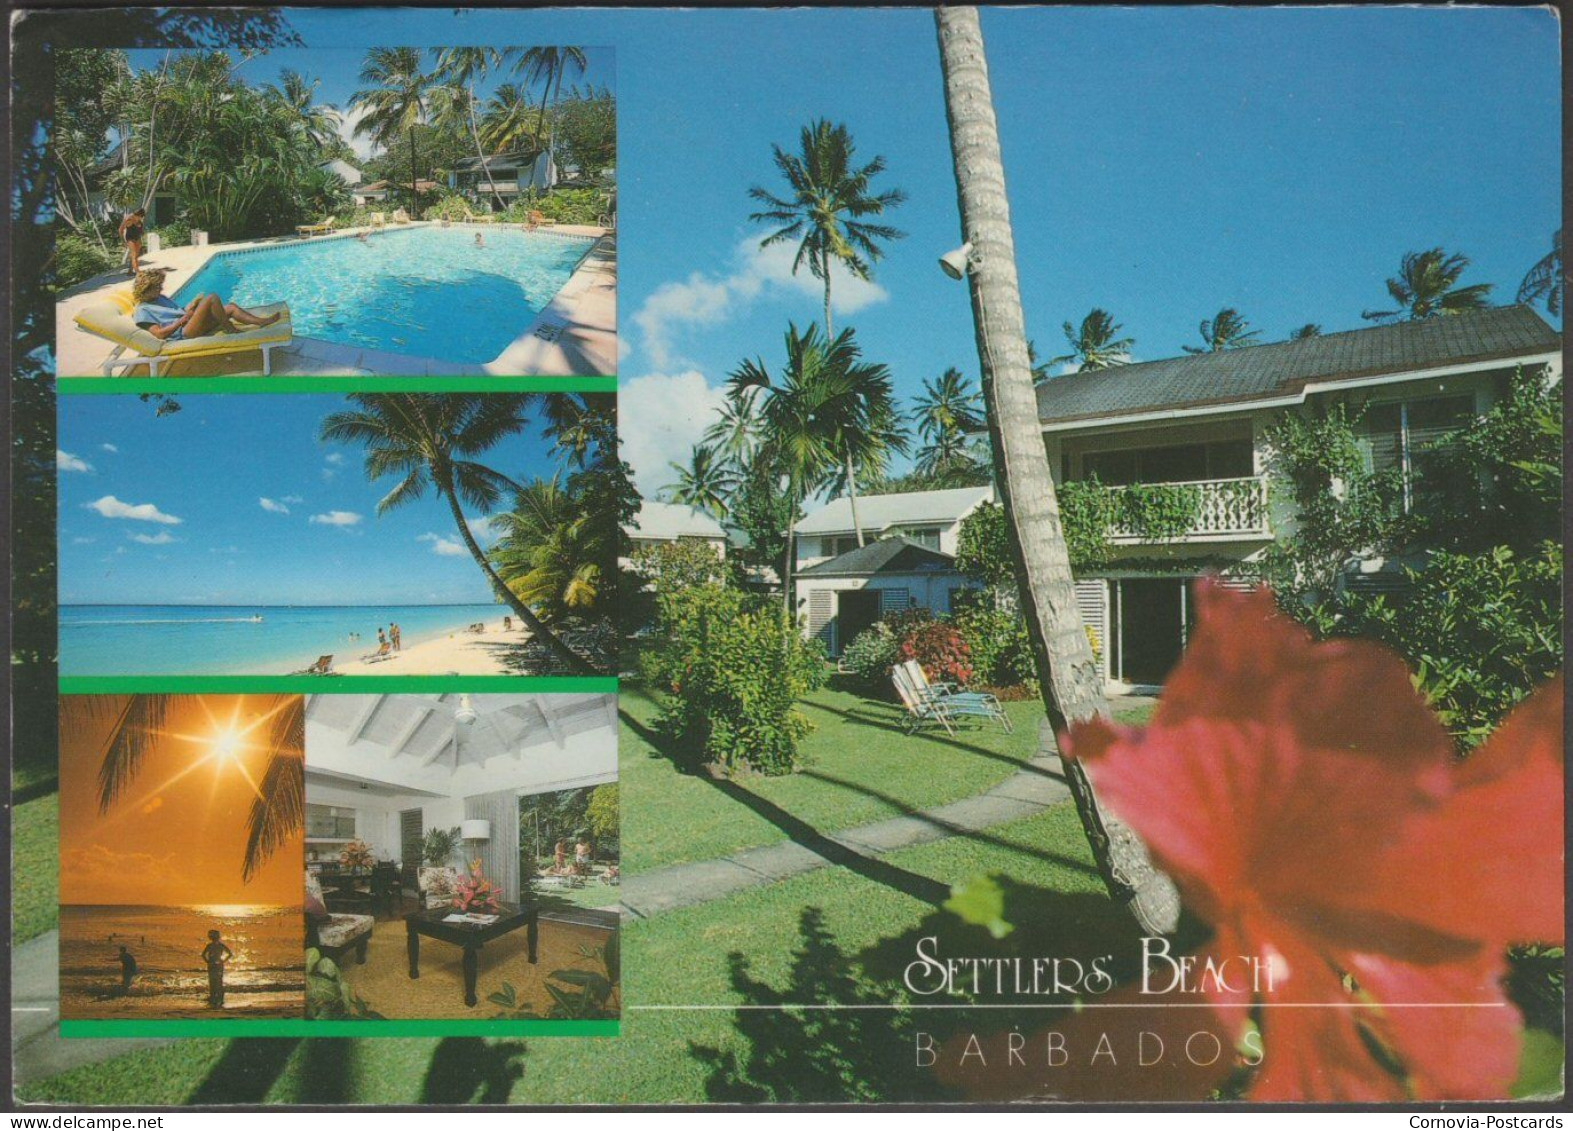 Settlers' Beach, Barbados, 1991 - Multi-Media Productions Postcard - Barbades